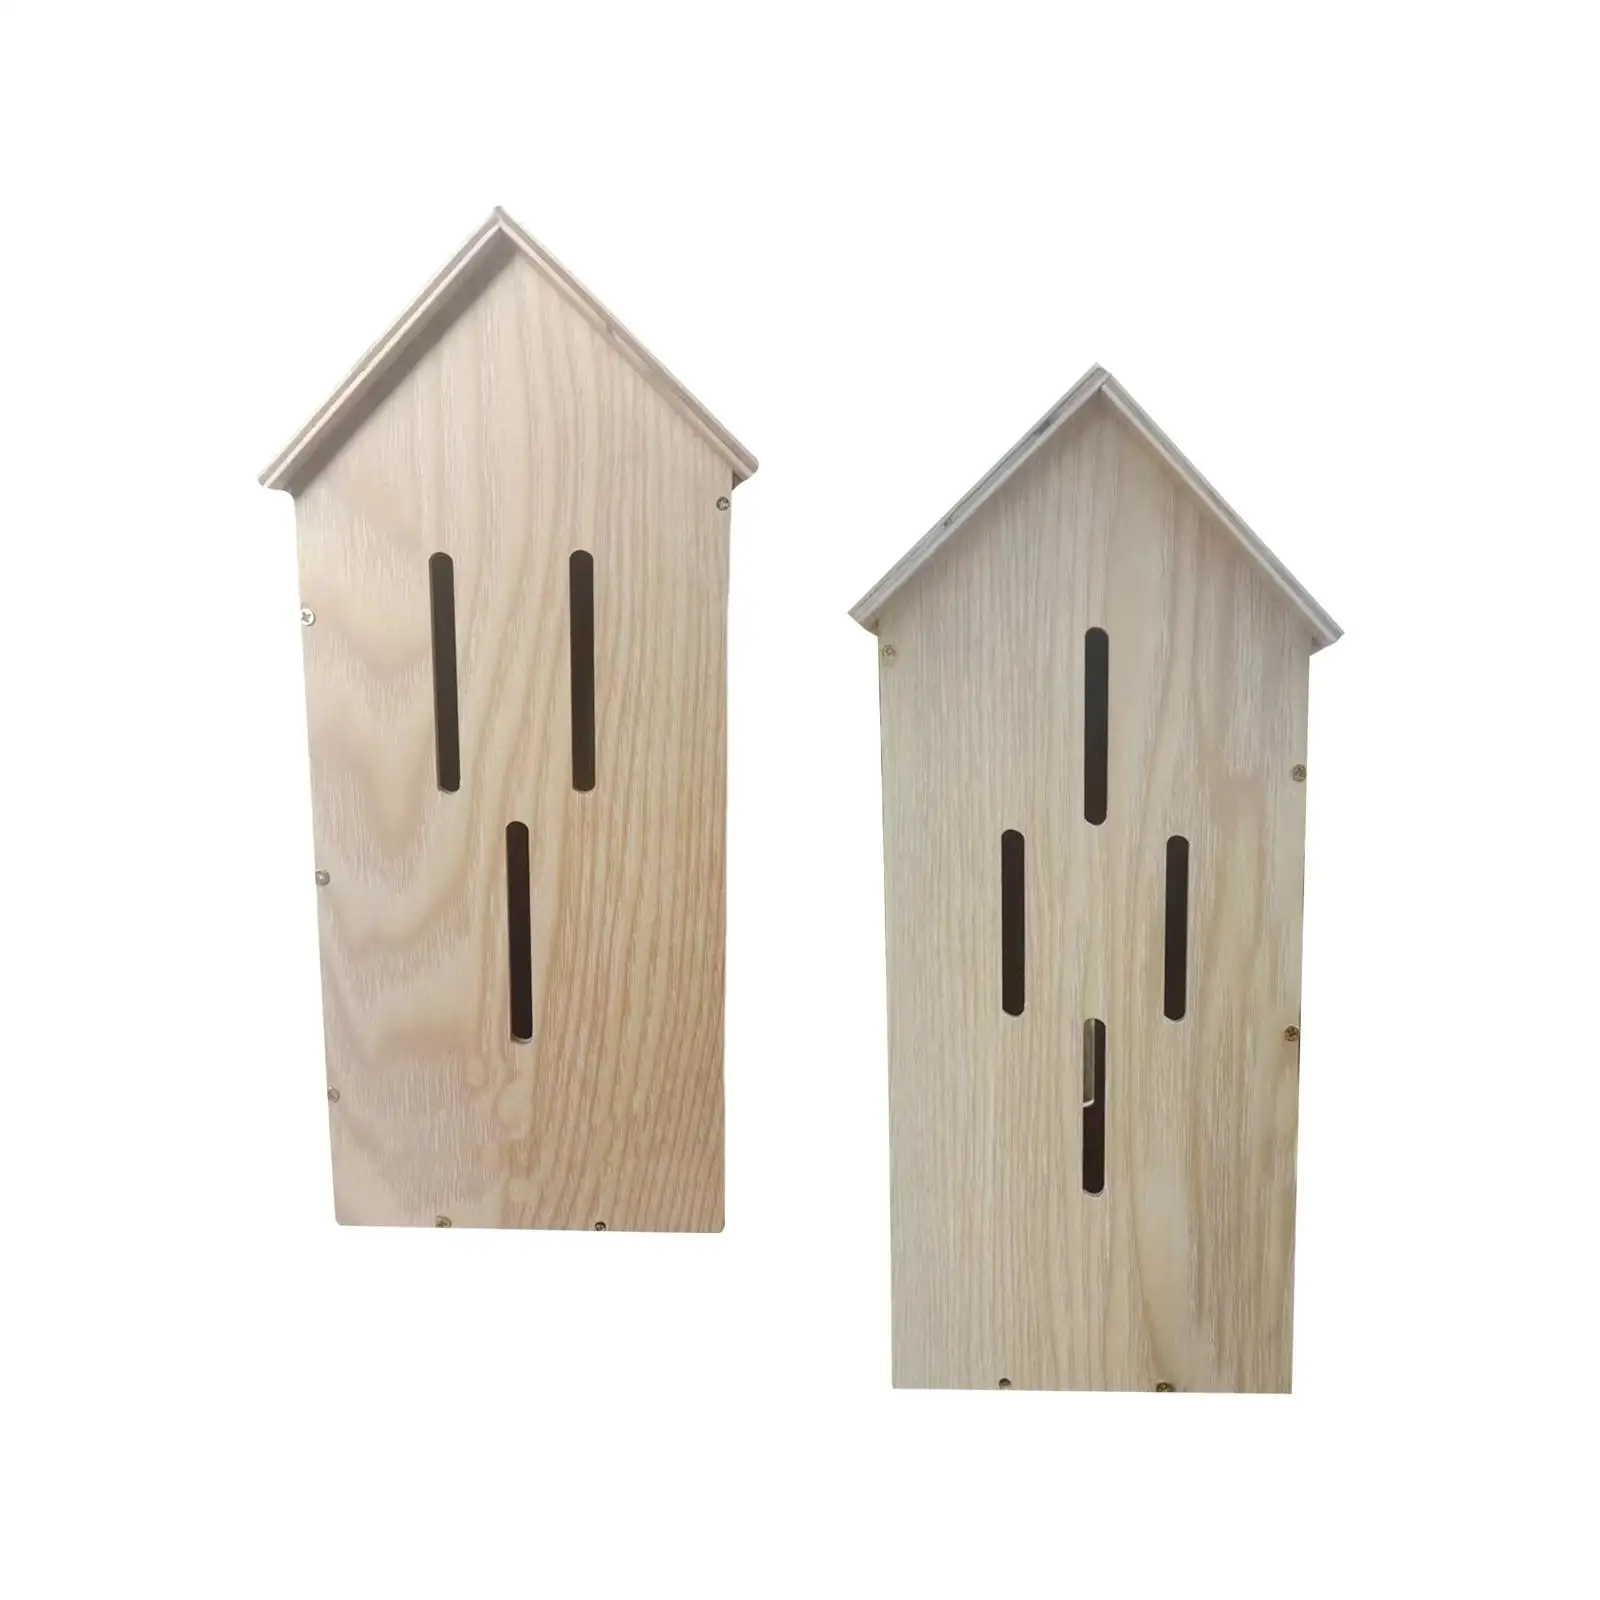 Butterfly Habitat Supplies Tree Trunk Protector Guard Bird house Kit House for Garden Room Outdoor Hotel